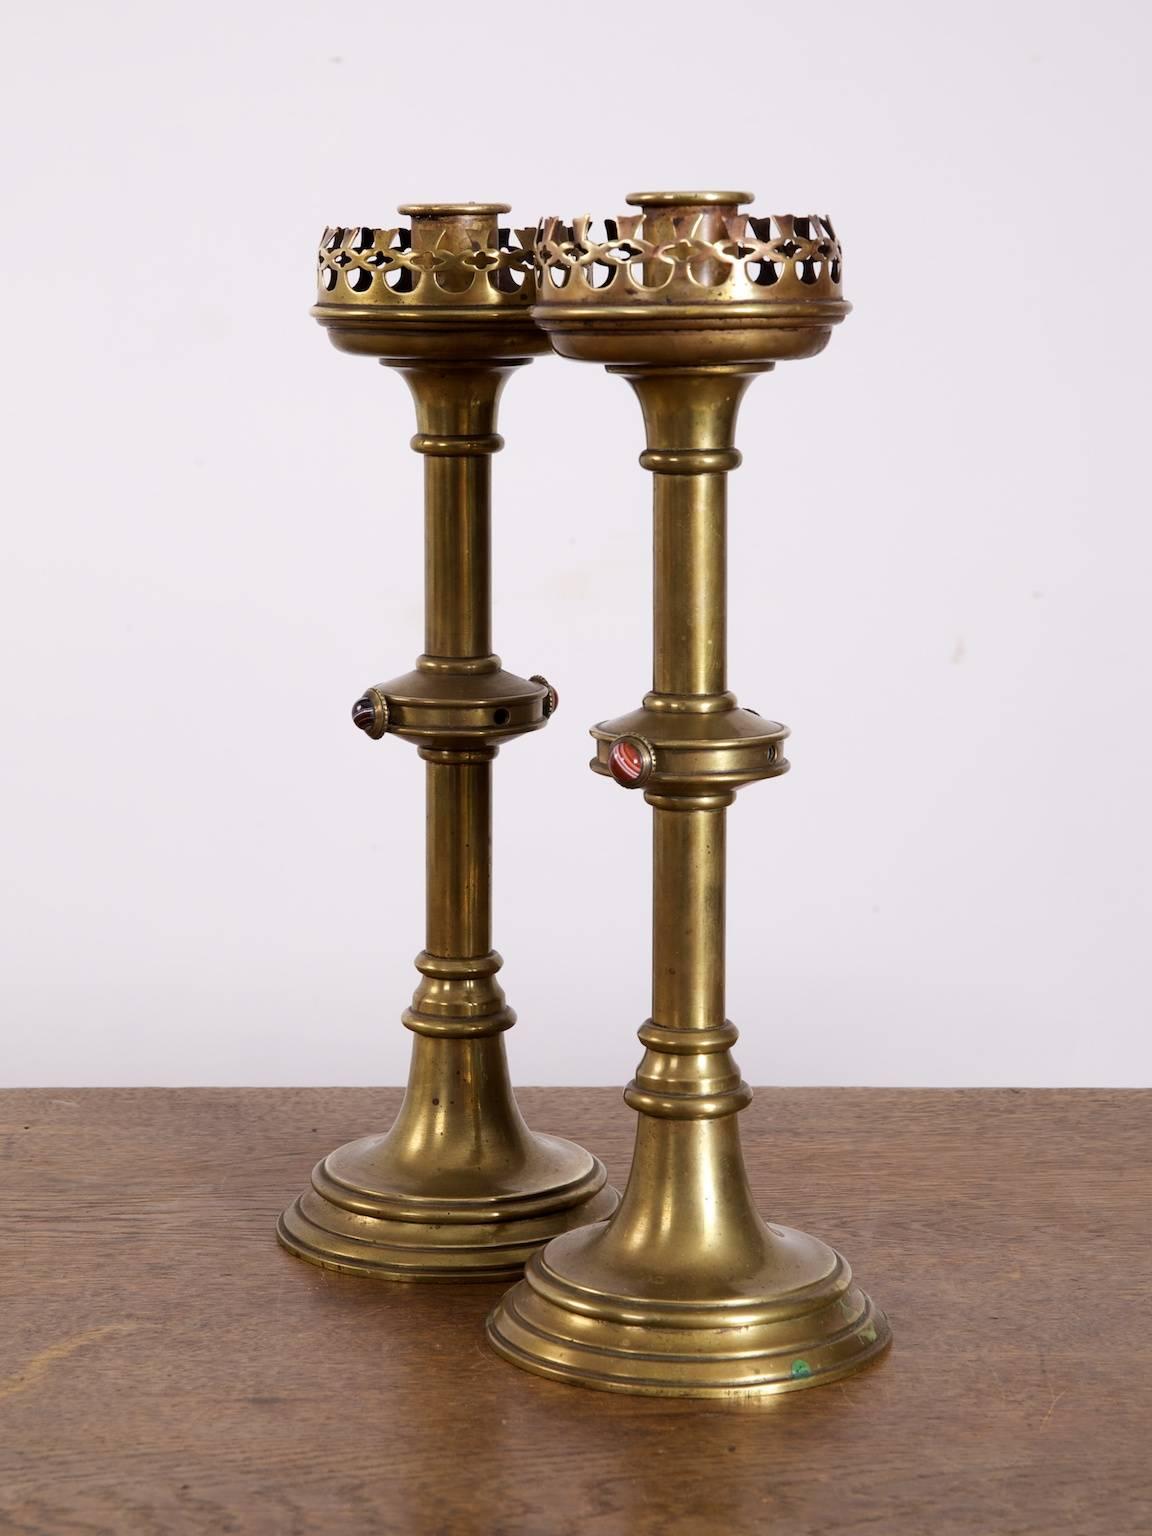 Gothic Candle Sticks In Good Condition For Sale In Llandudno, Conwy